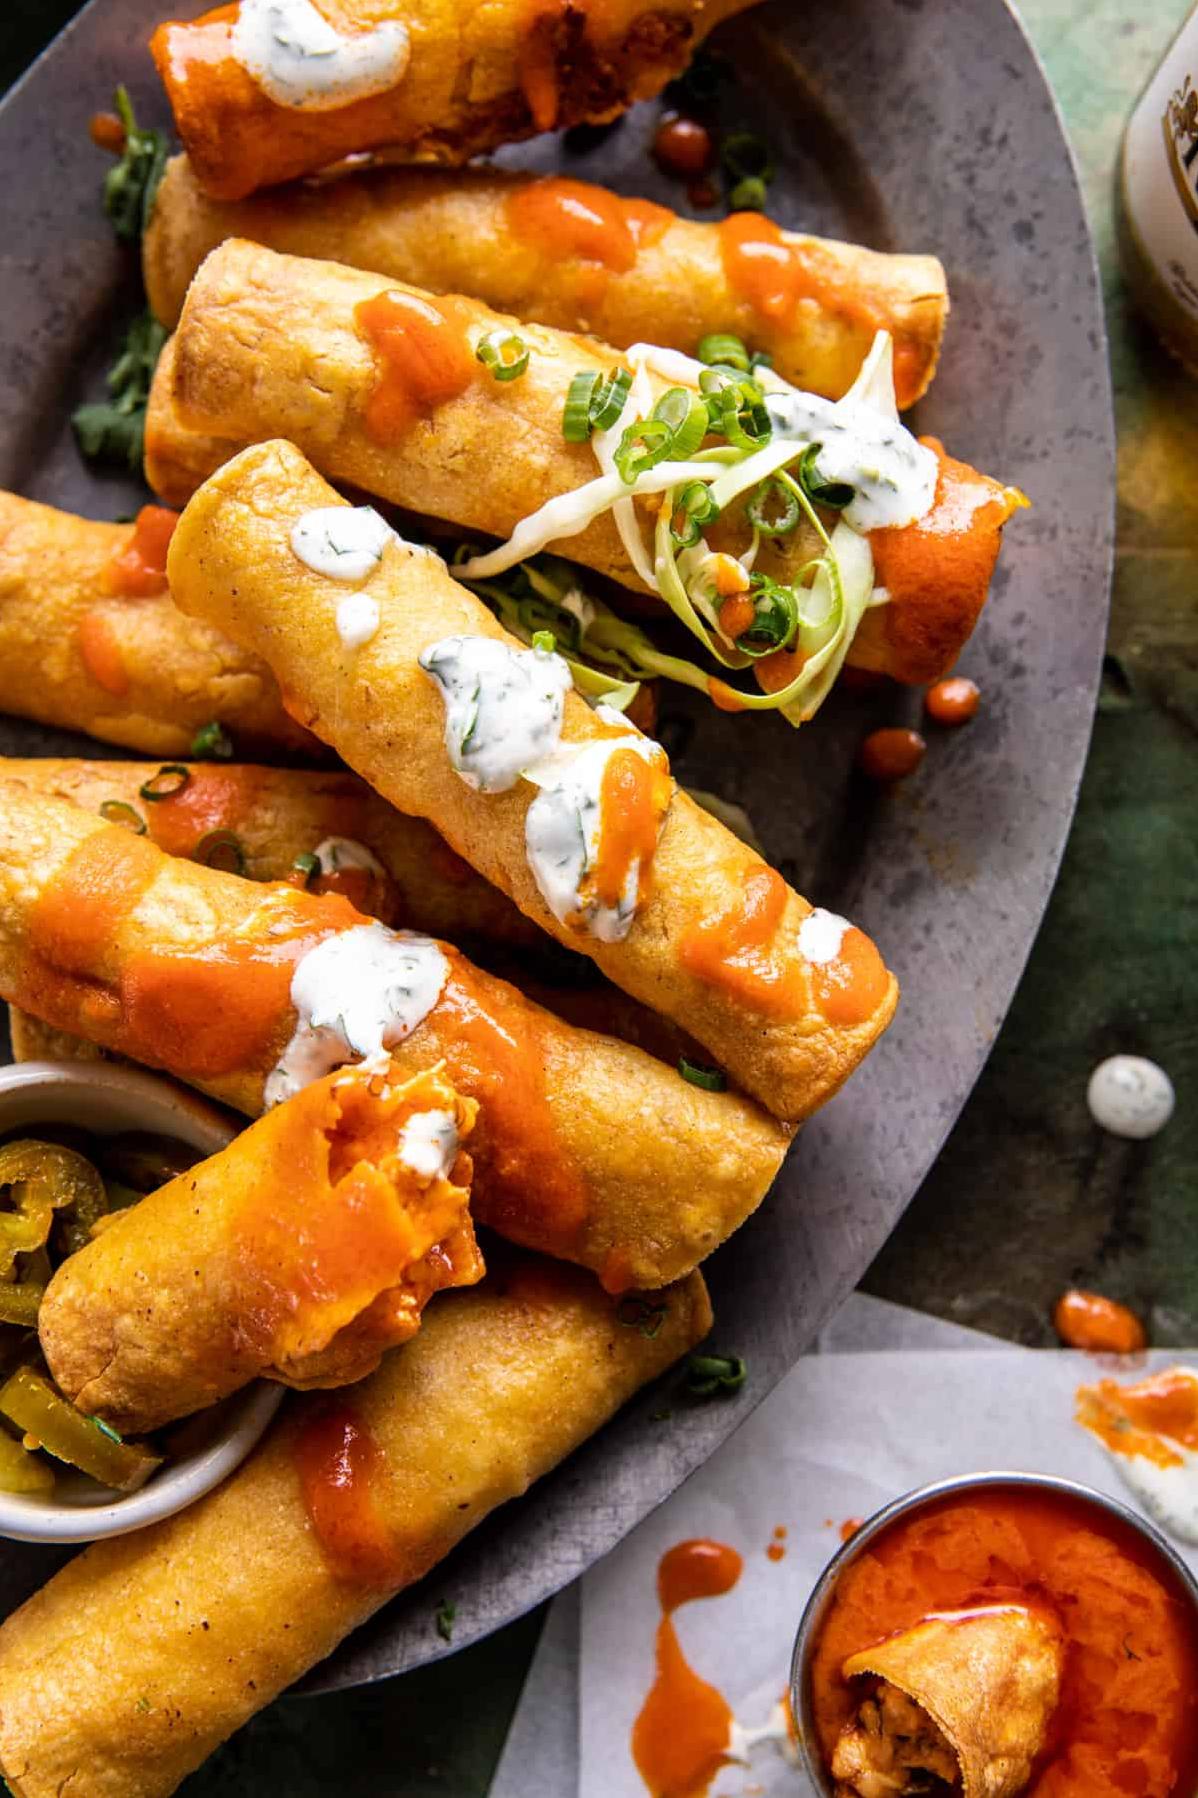  Ready to spice up your snack game with these vegetarian taquitos?